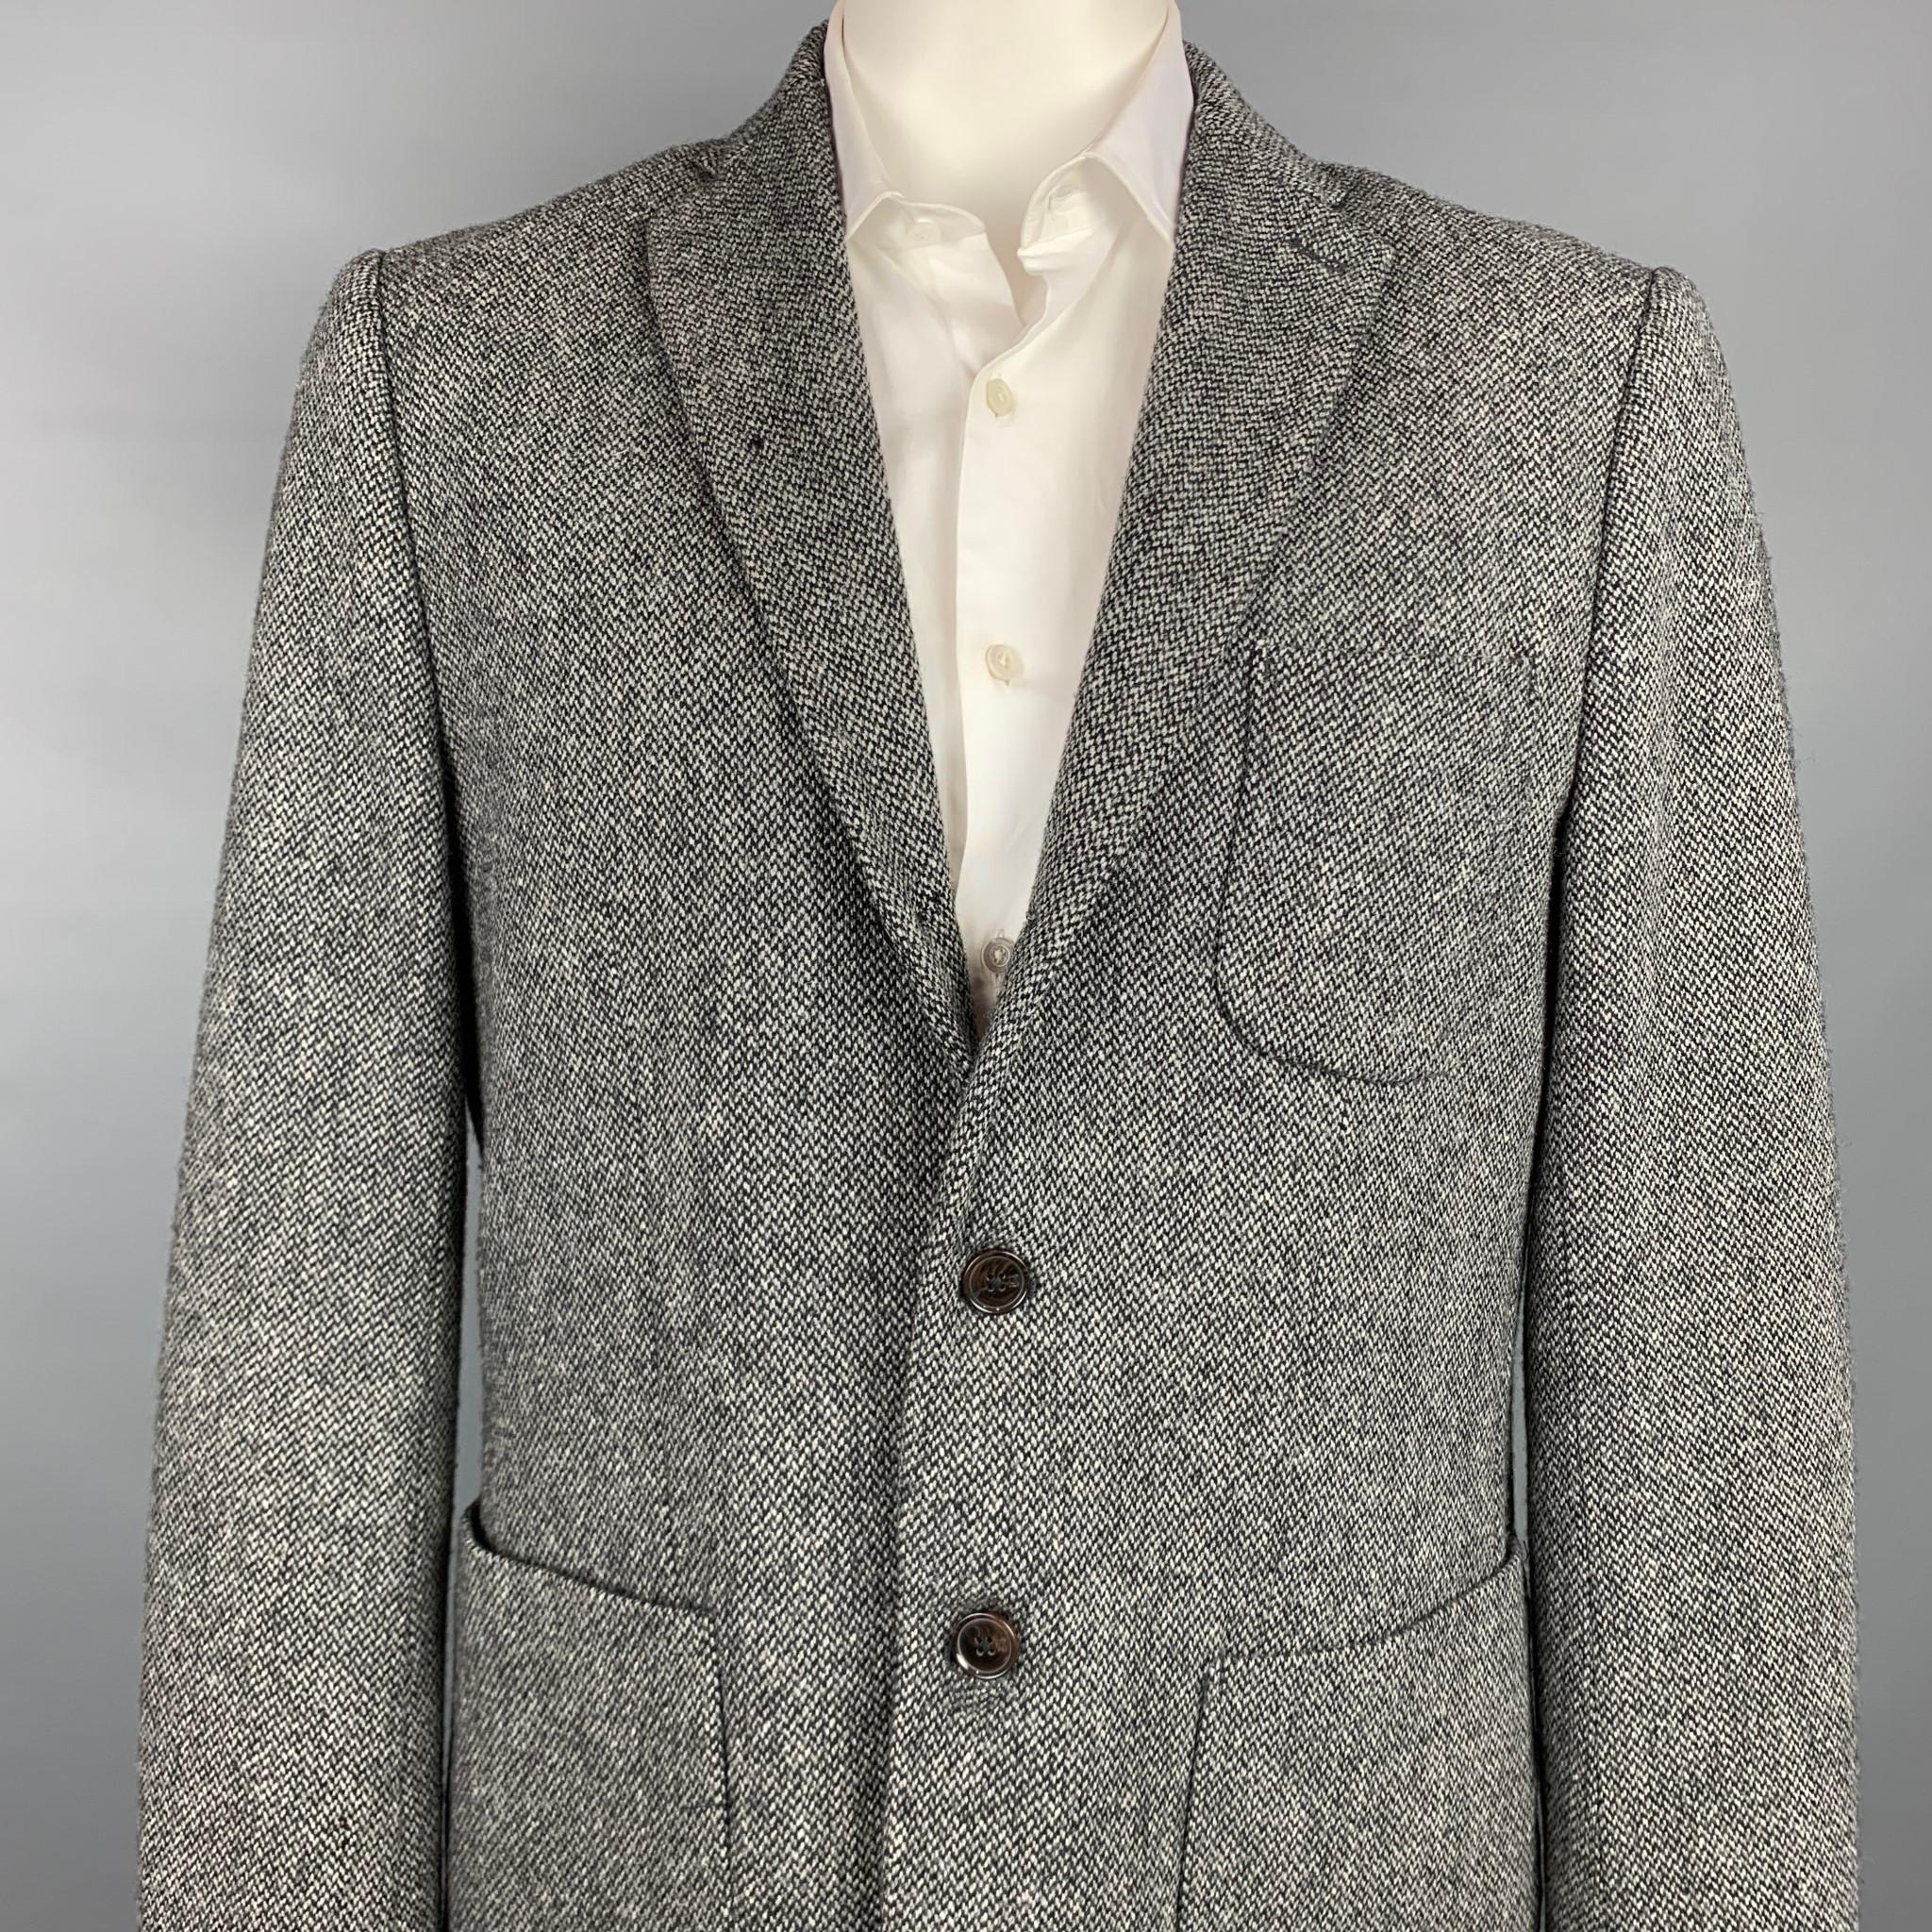 SCOTCH AND SODA sport coat comes in a grey & black wool / polyester with a half liner featuring a notch lapel, patch pockets, and a three button closure.

Very Good Pre-Owned Condition.
Marked: XXL/54

Measurements:

Shoulder: 19.5 in.
Chest: 44